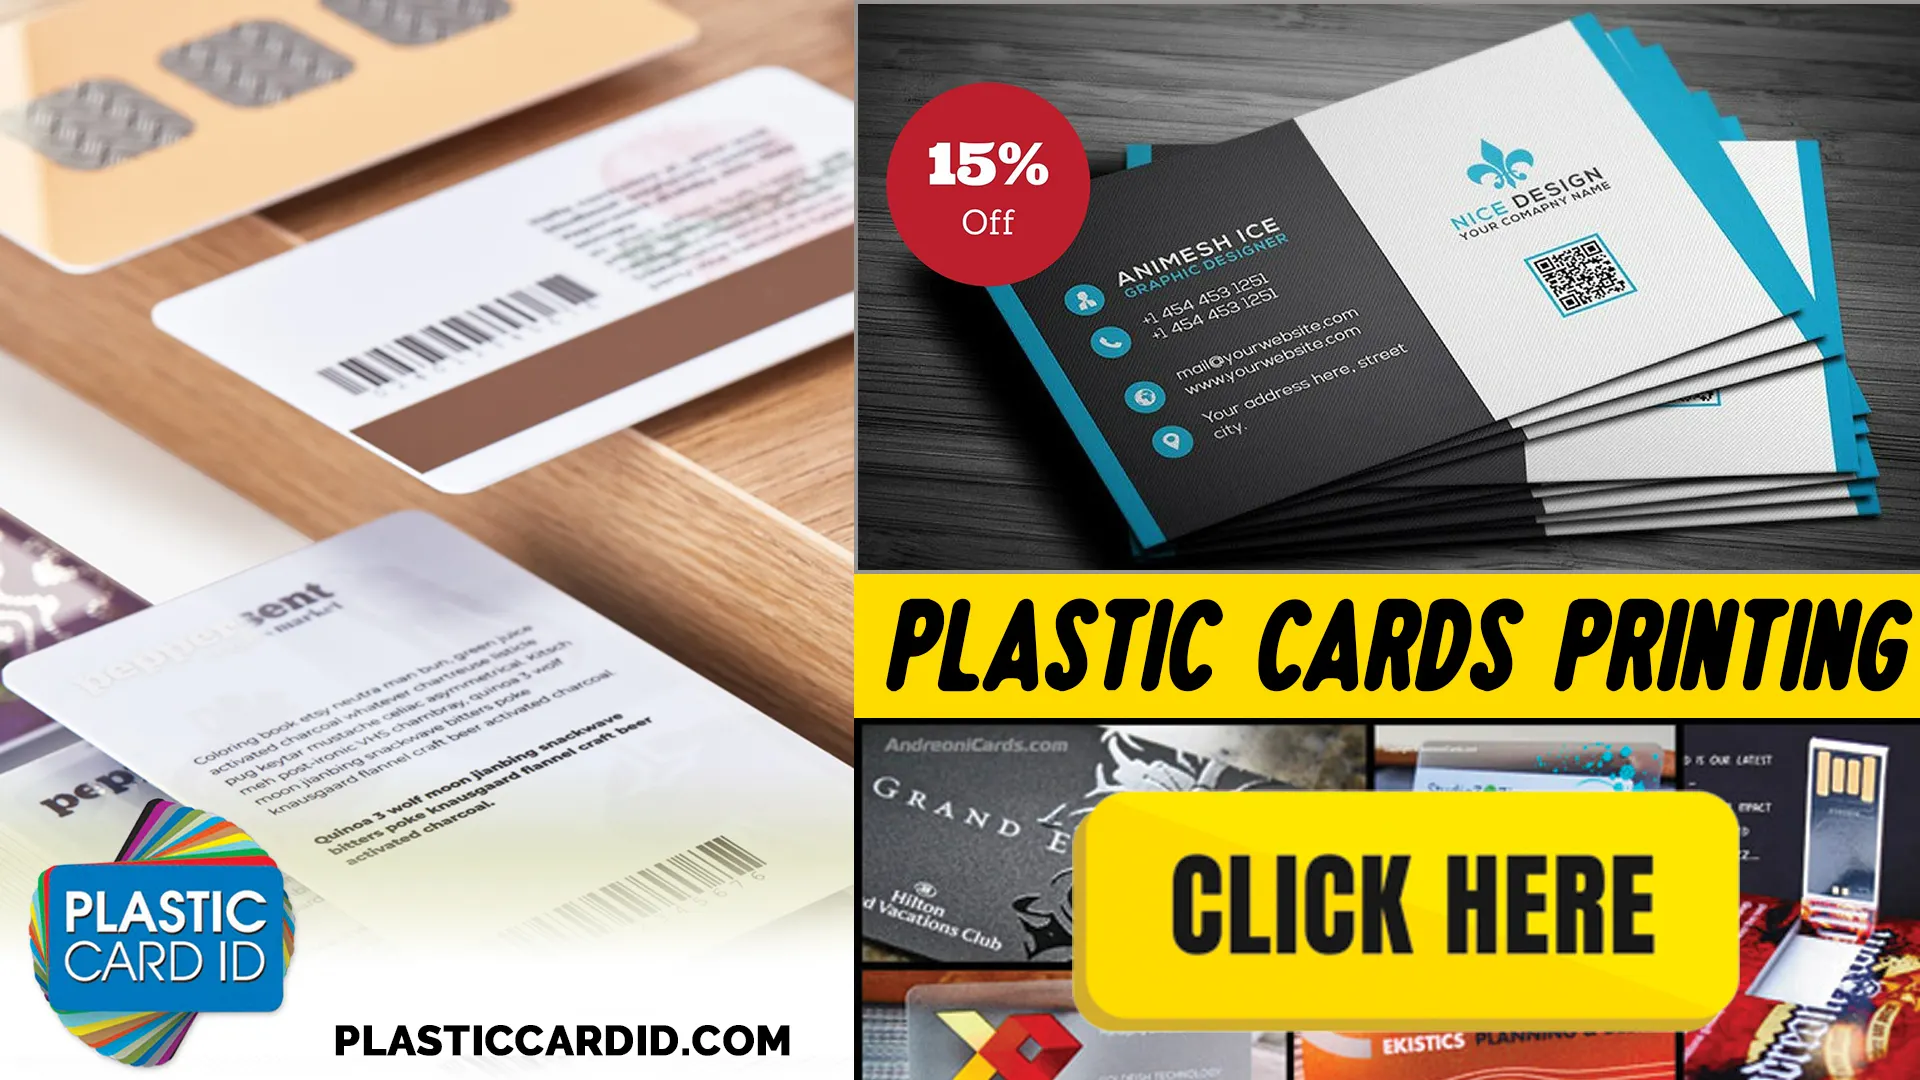 State-of-the-Art Card Printers Provided by Plastic Card ID




